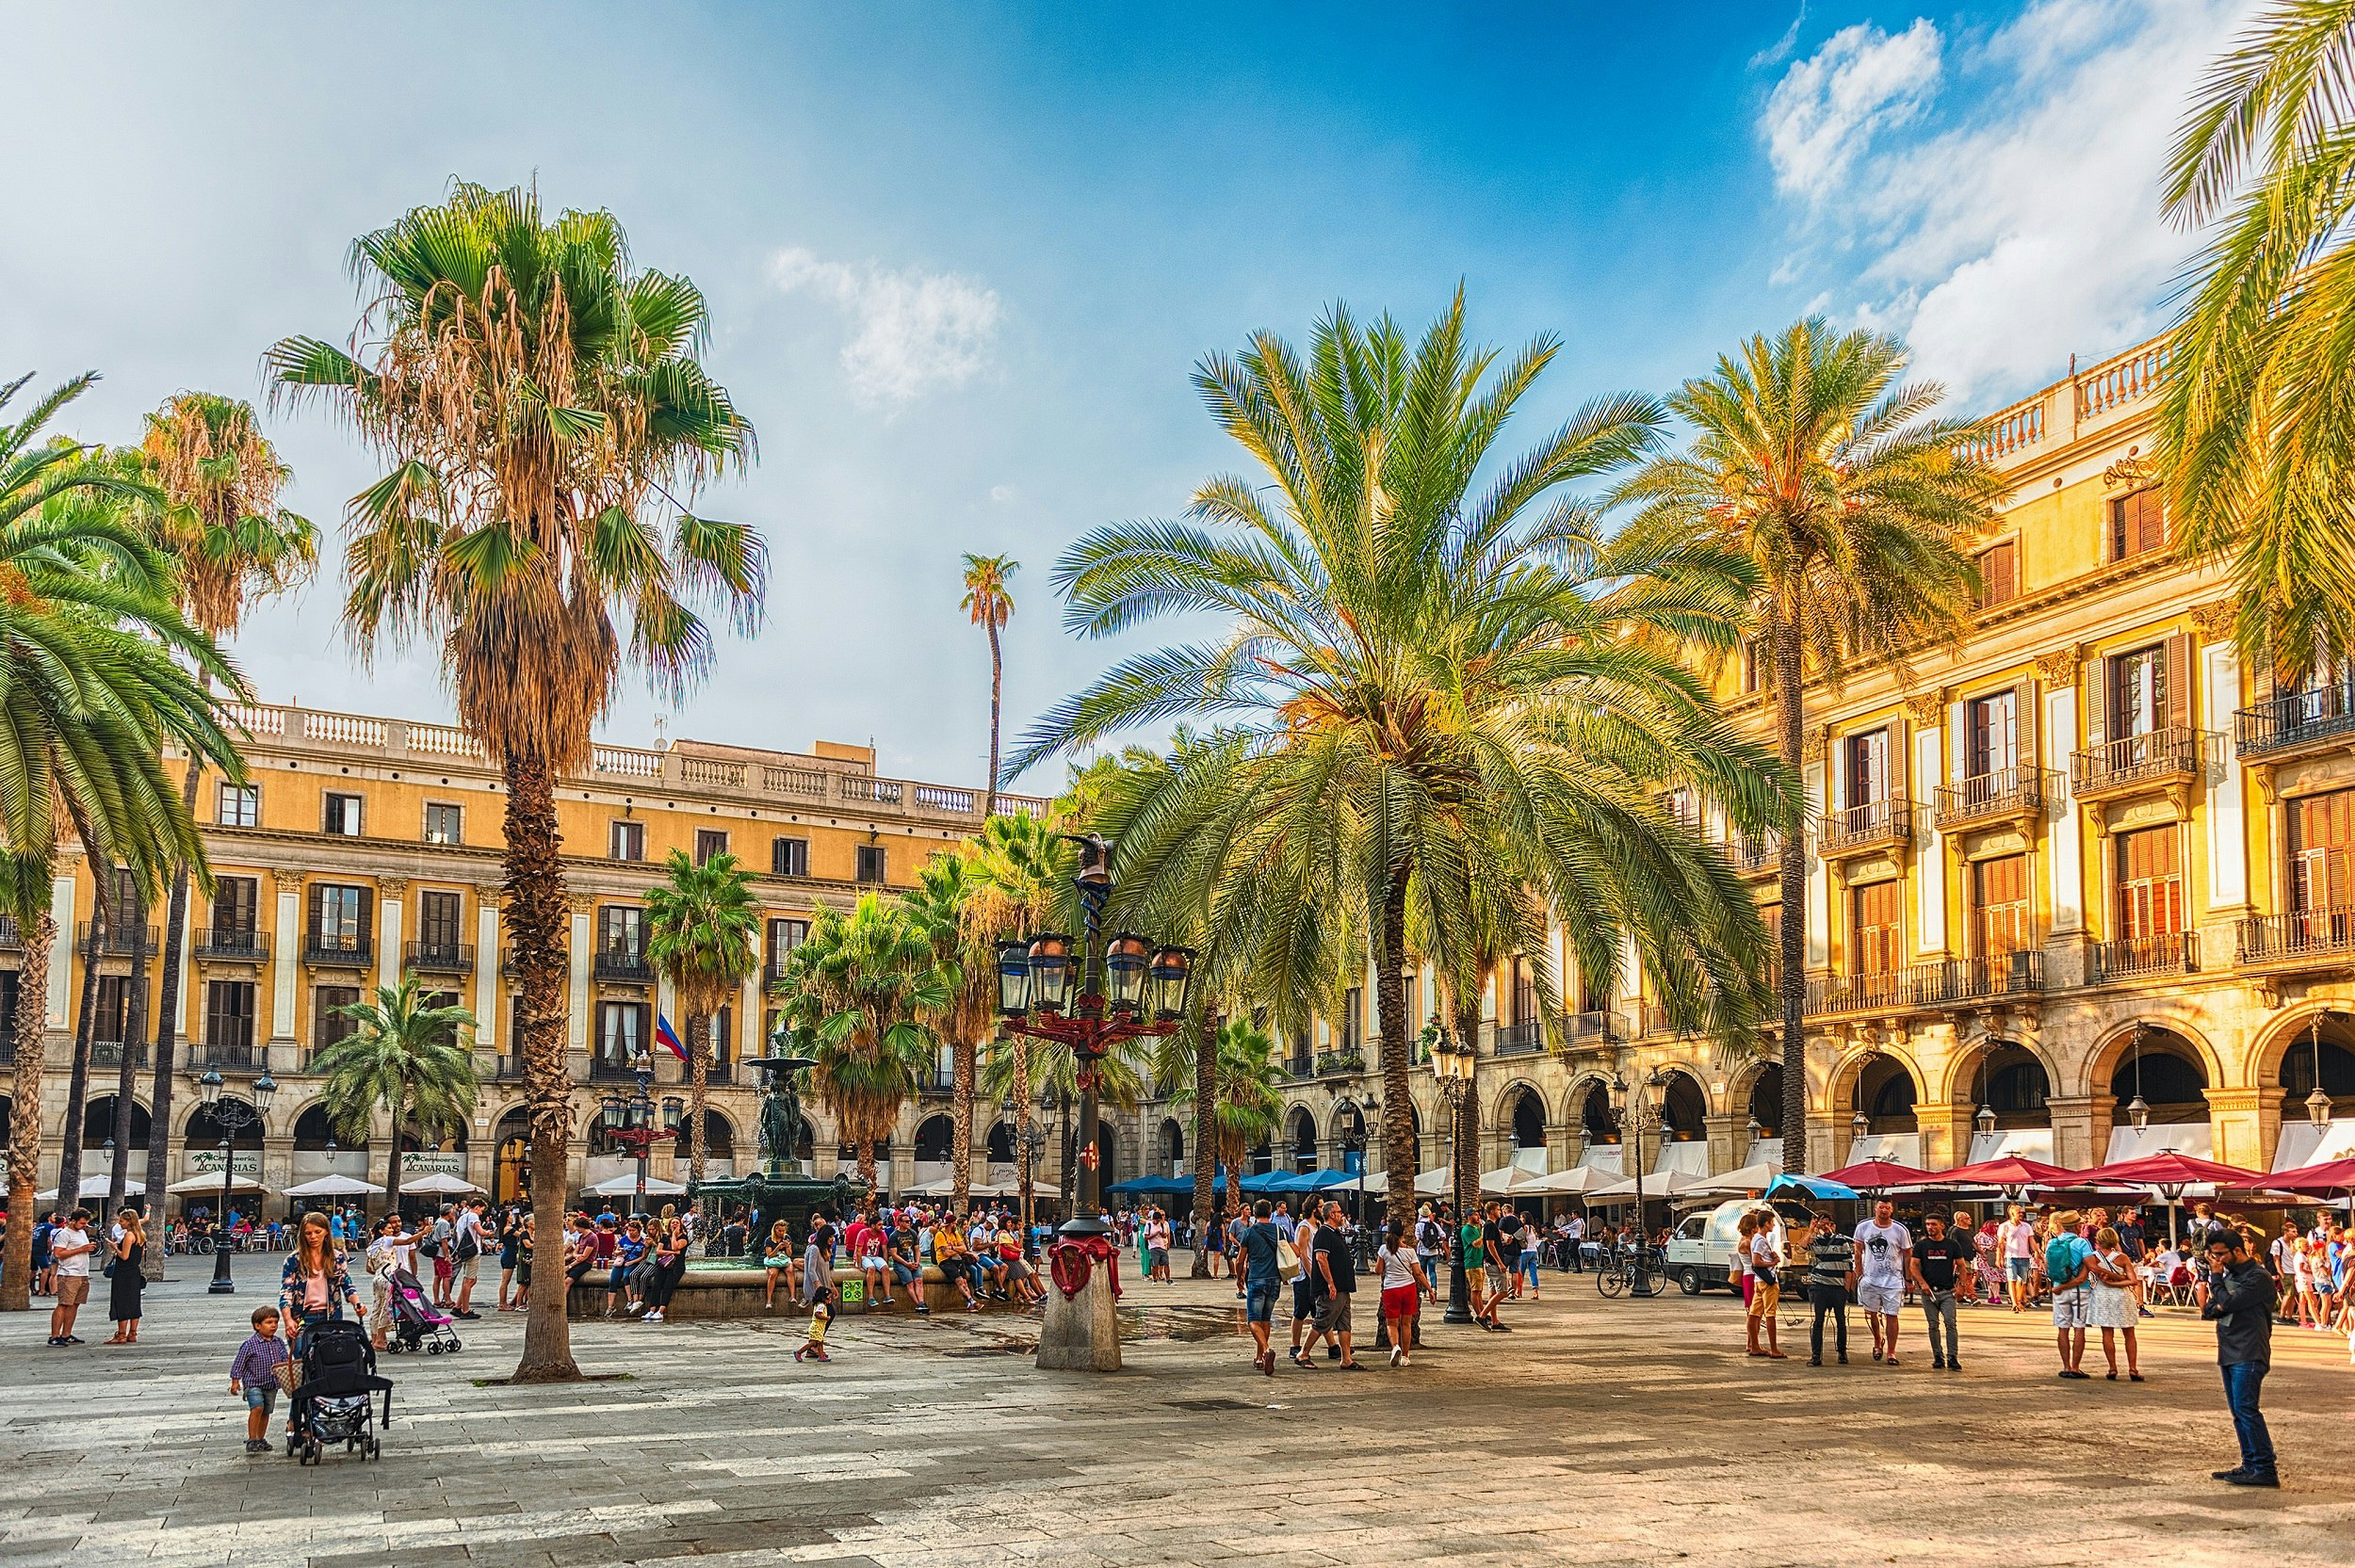 A large square with palm trees. The buildings lining the square are bathed in sunlight. Below each building are awnings and umbrellas. People sit at the restaurants there